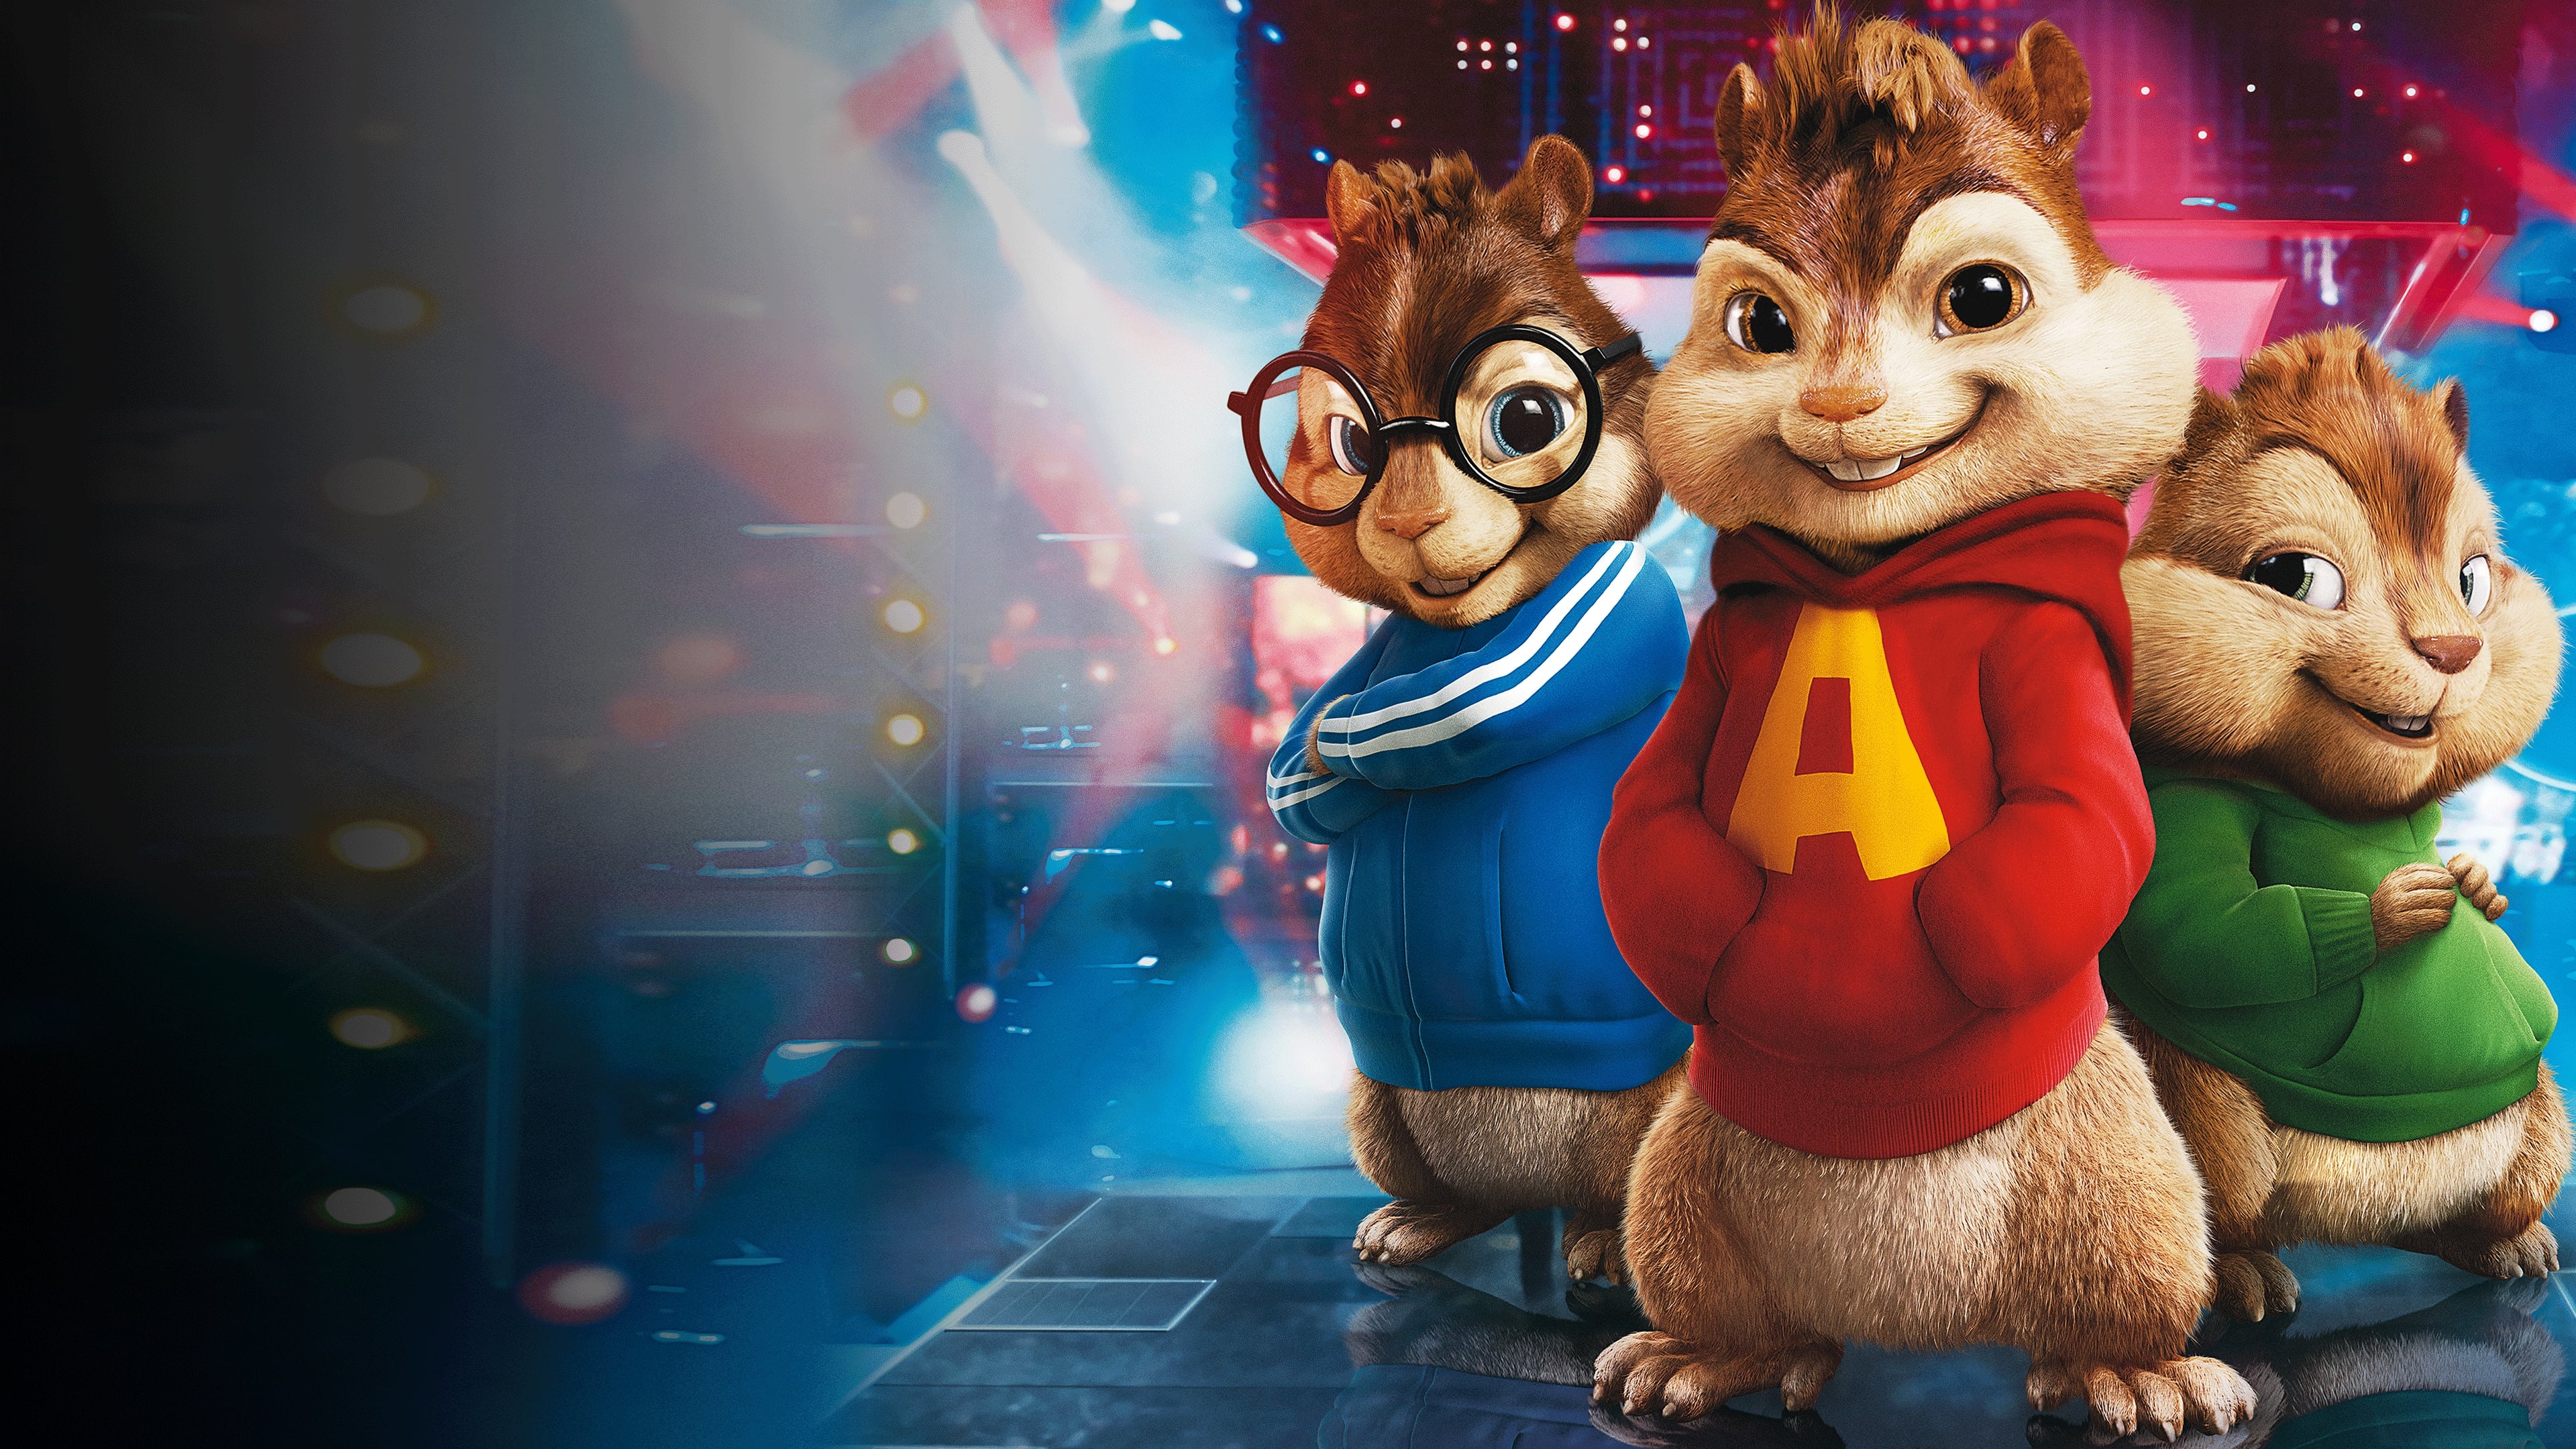 Alvin and the Chipmunks (2007). 